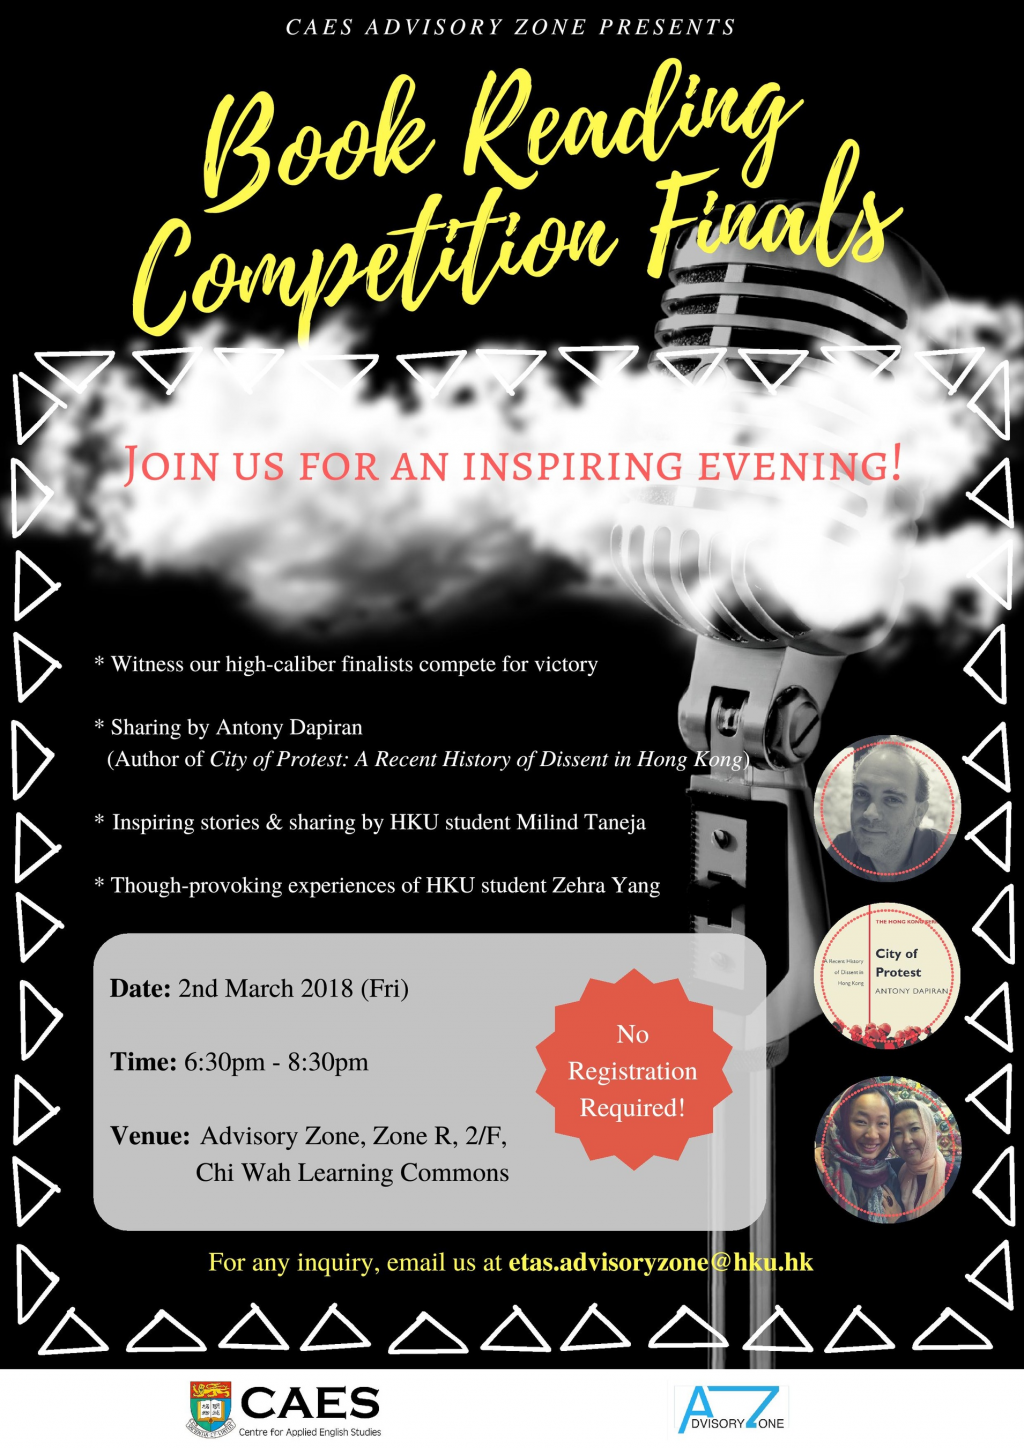 Book Reading Competition Finals